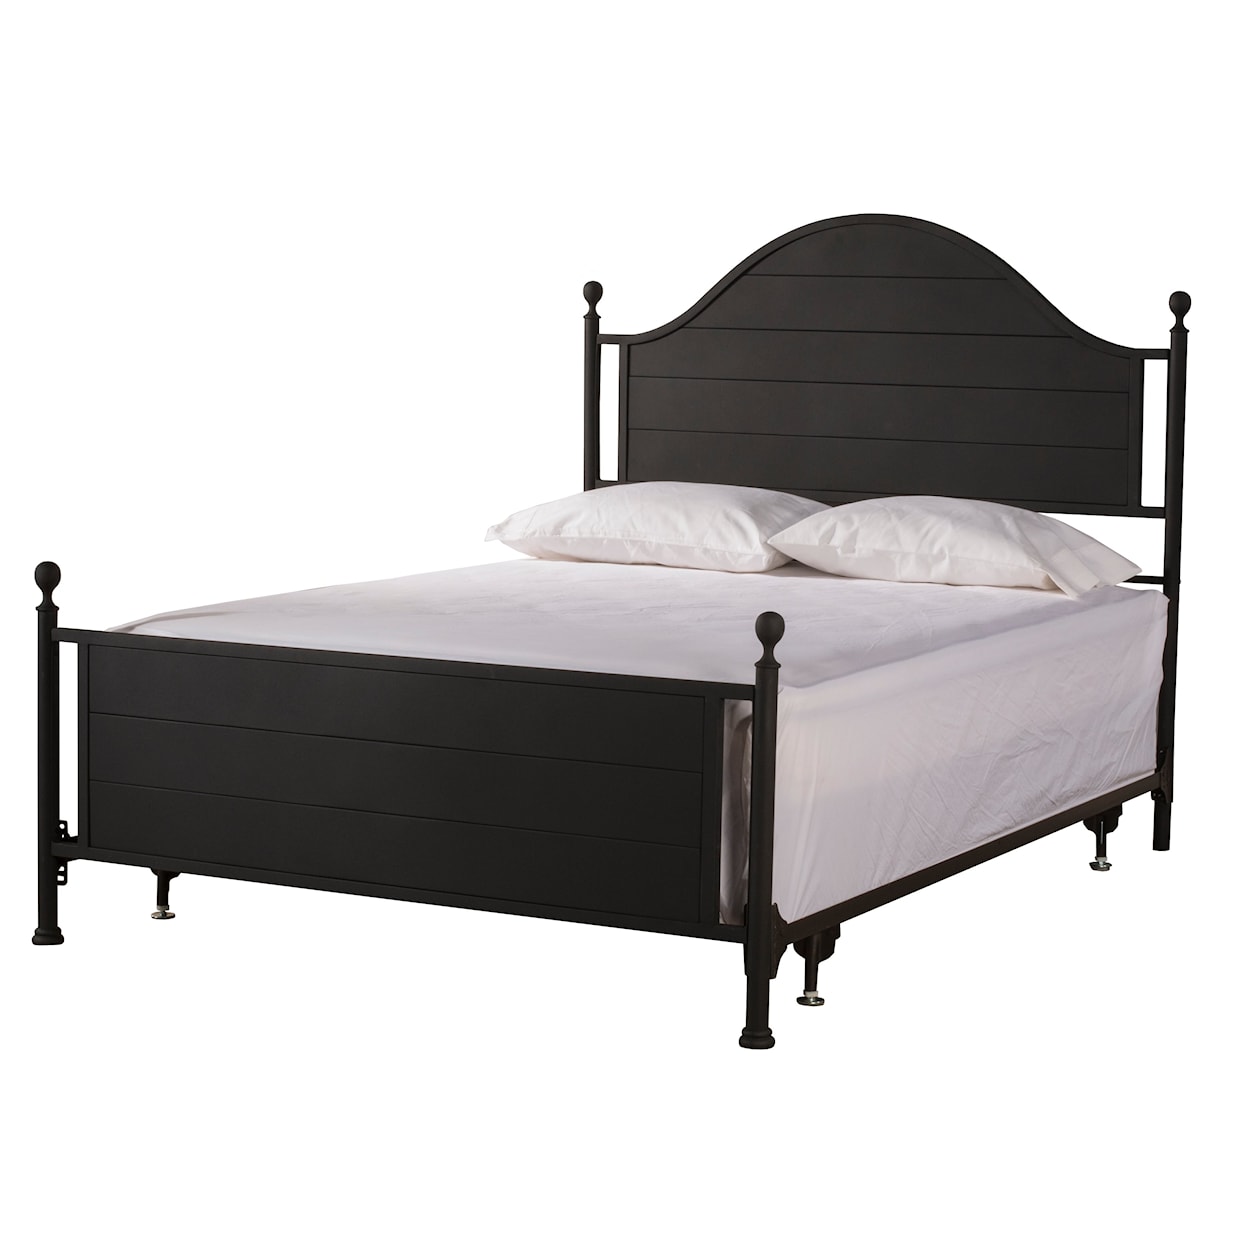 Hillsdale Cumberland King Bed